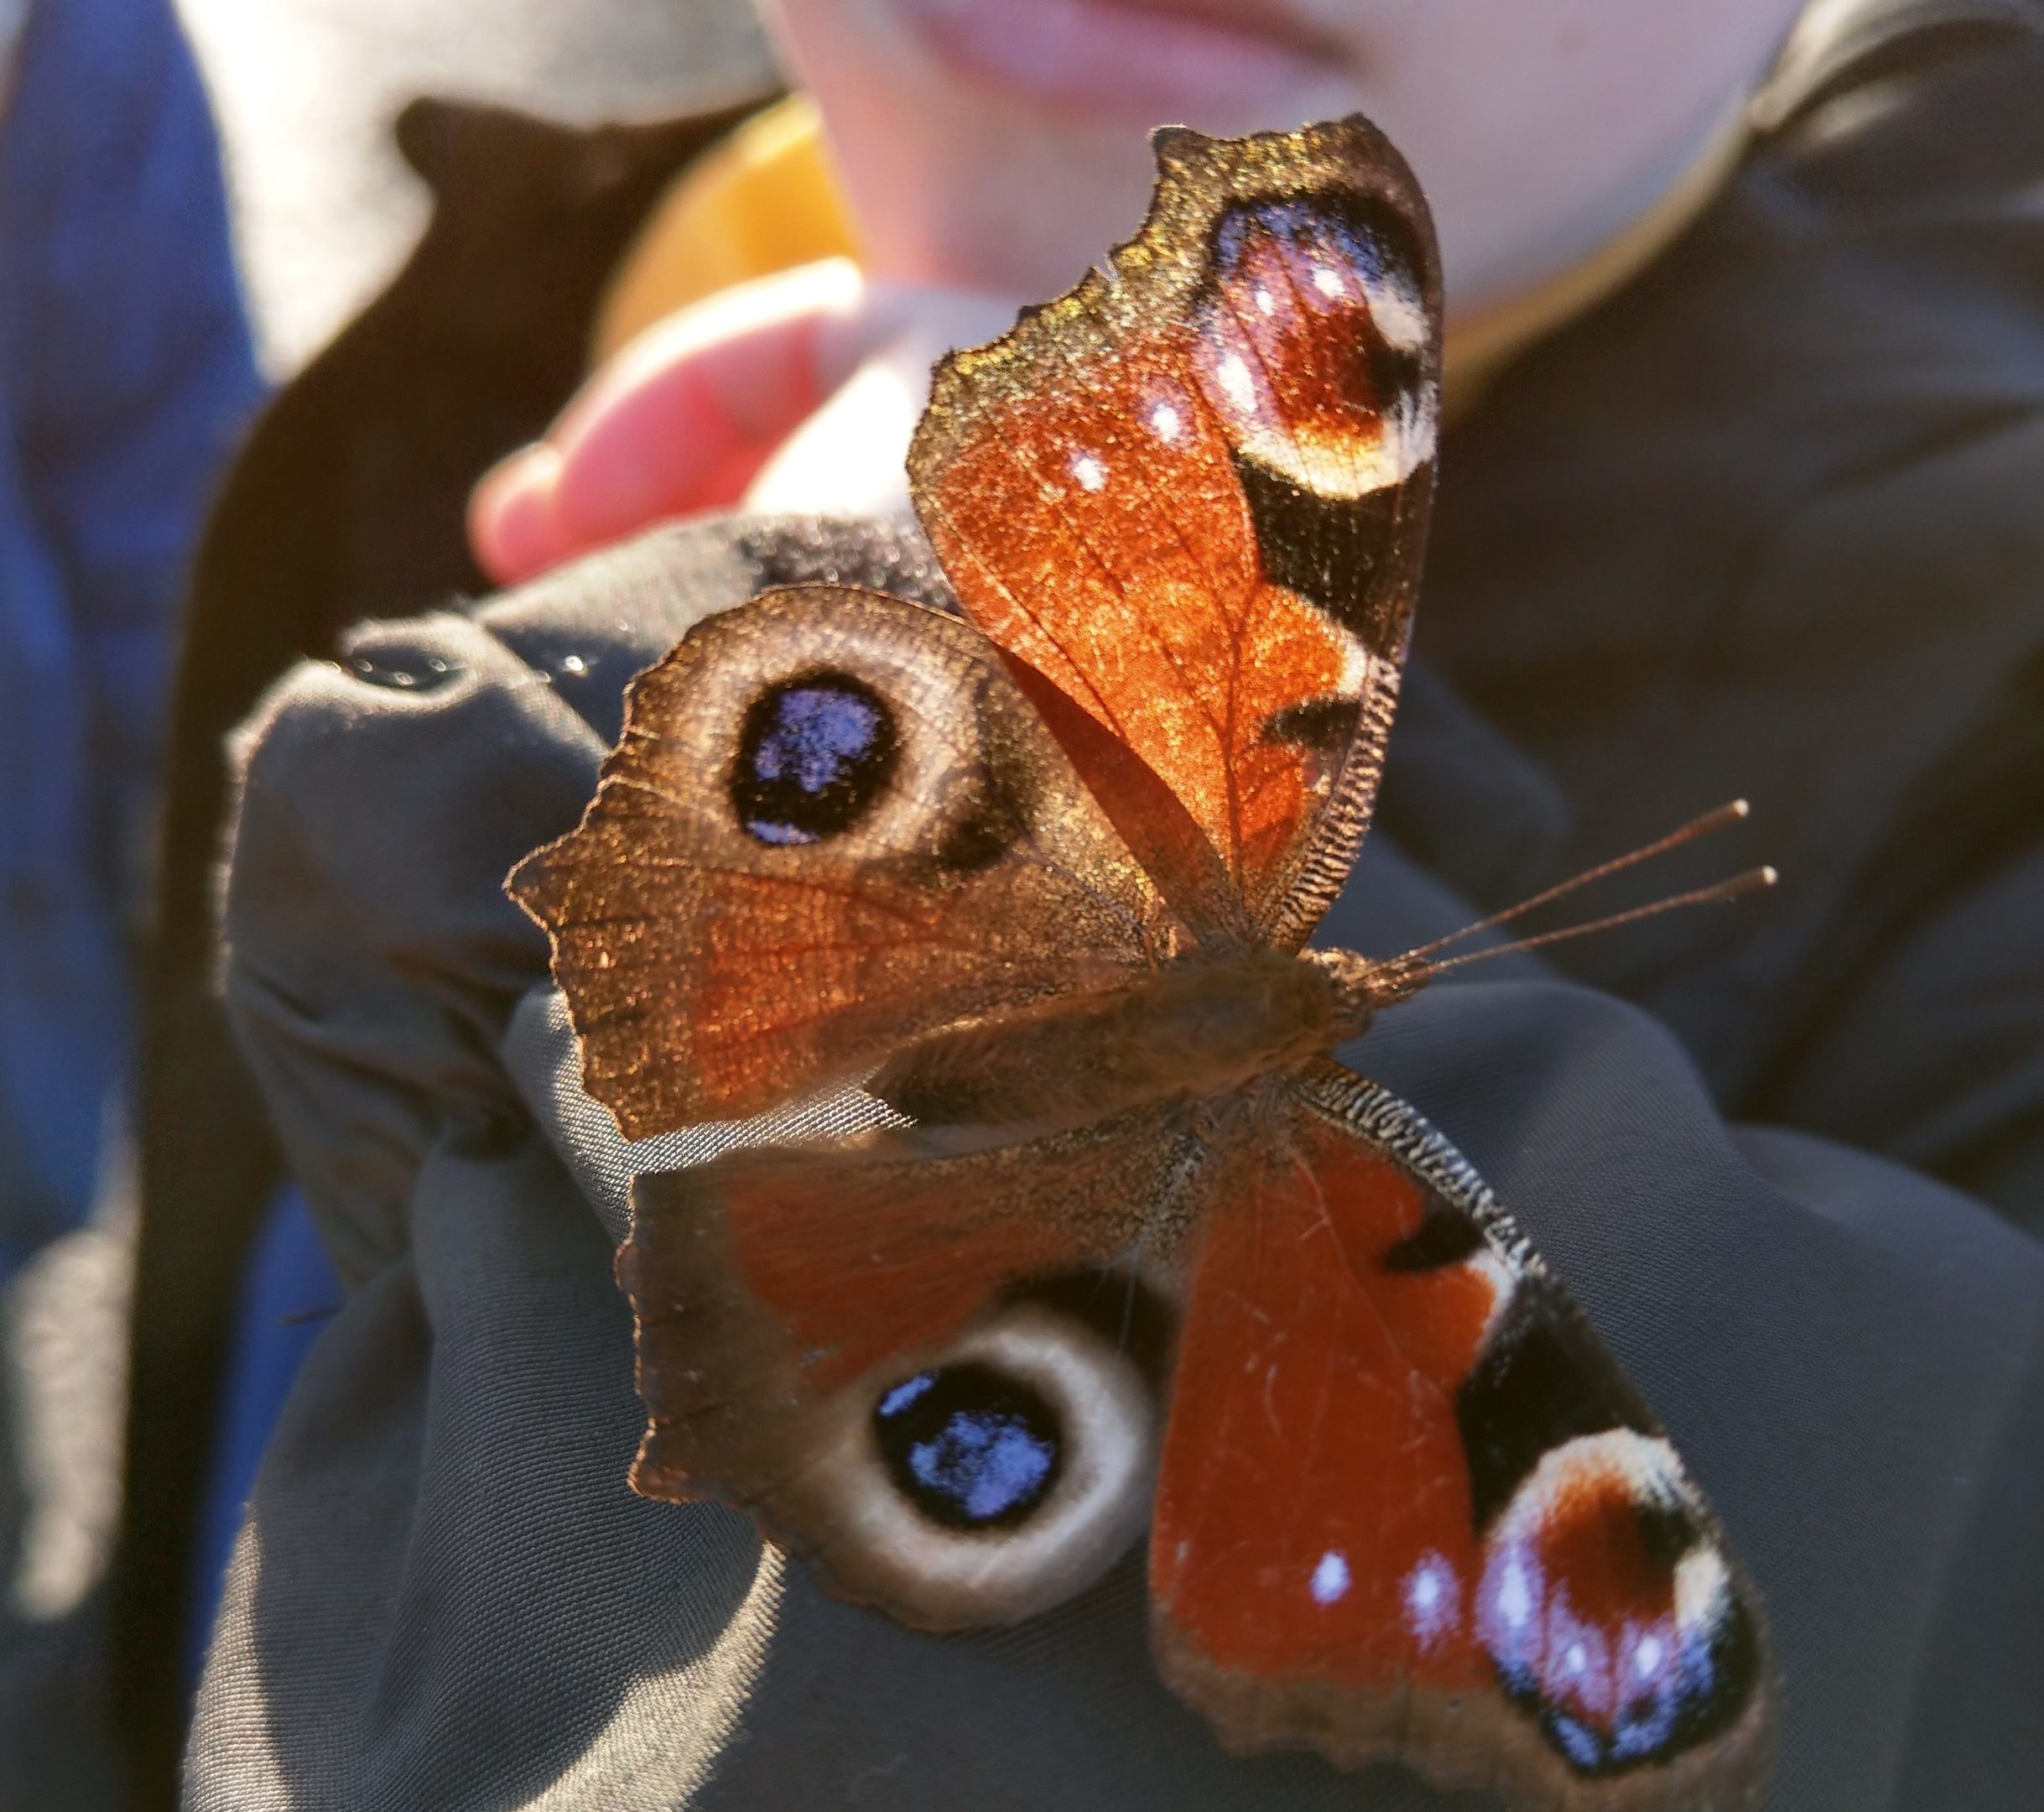 The peacock butterfly spotted in Leven on January 26.